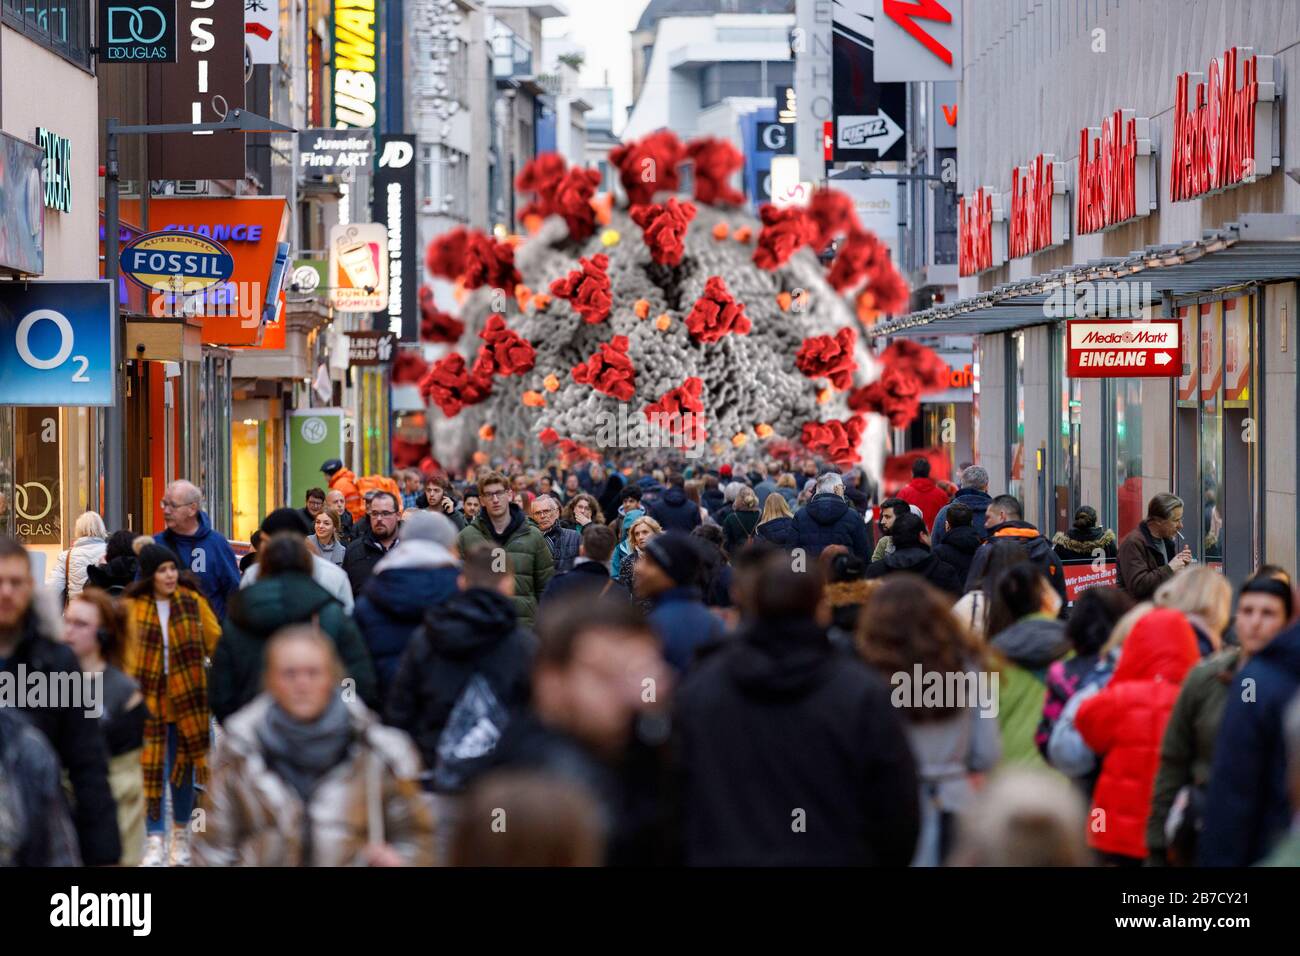 Corona cases in the population are increasing in North Rhine-Westphalia - in the picture the Cologne High Street (using a graphic from the CDC released under public domain). Stock Photo